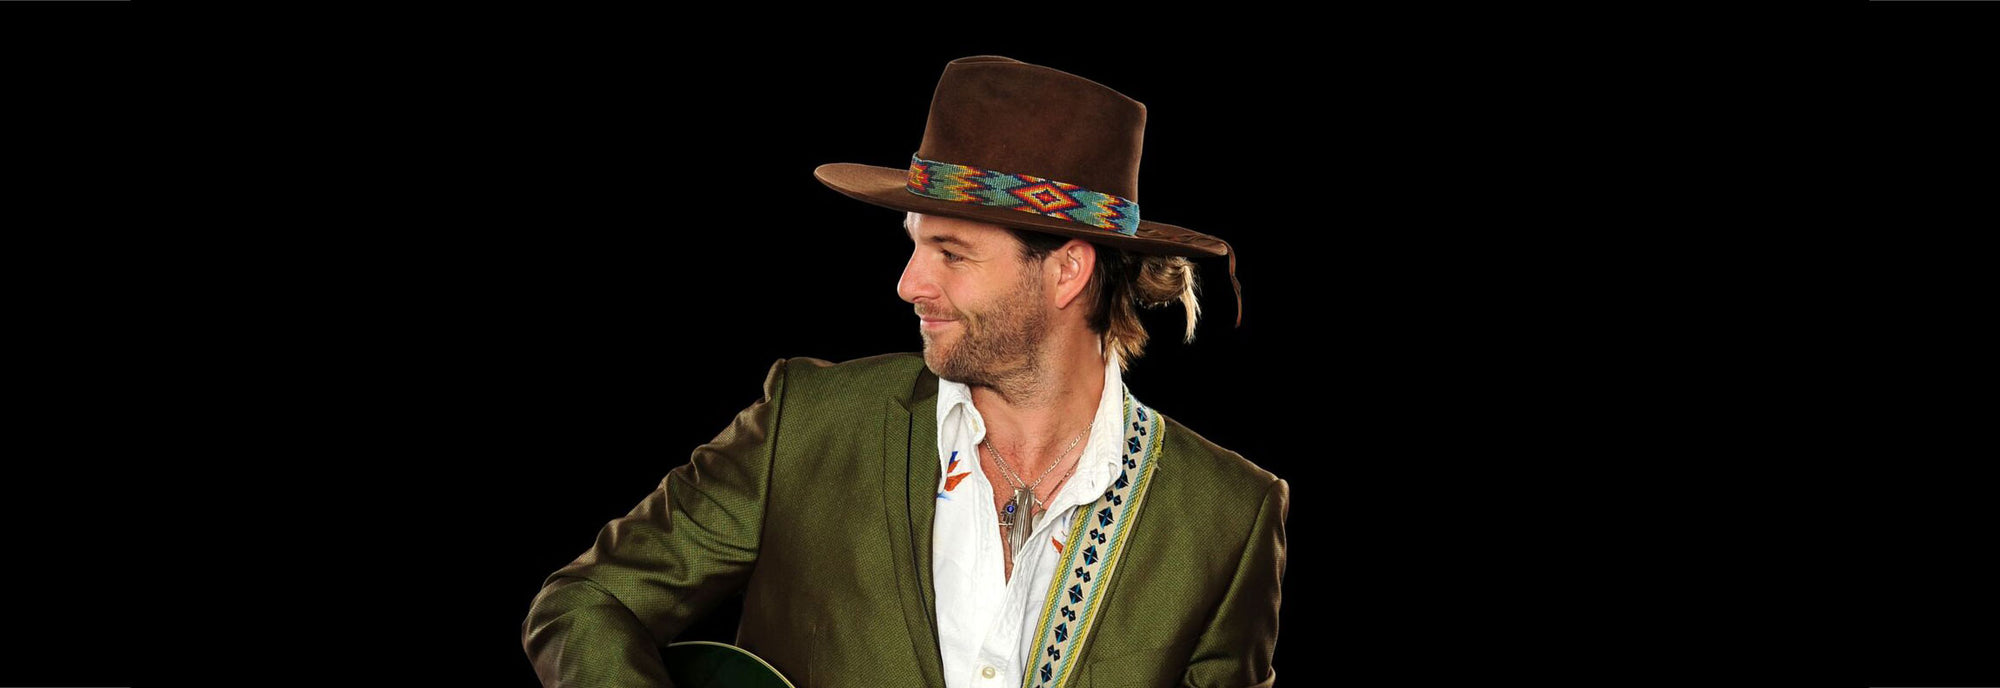 "In The Round" by Keith Harkin Pre-Order Available!